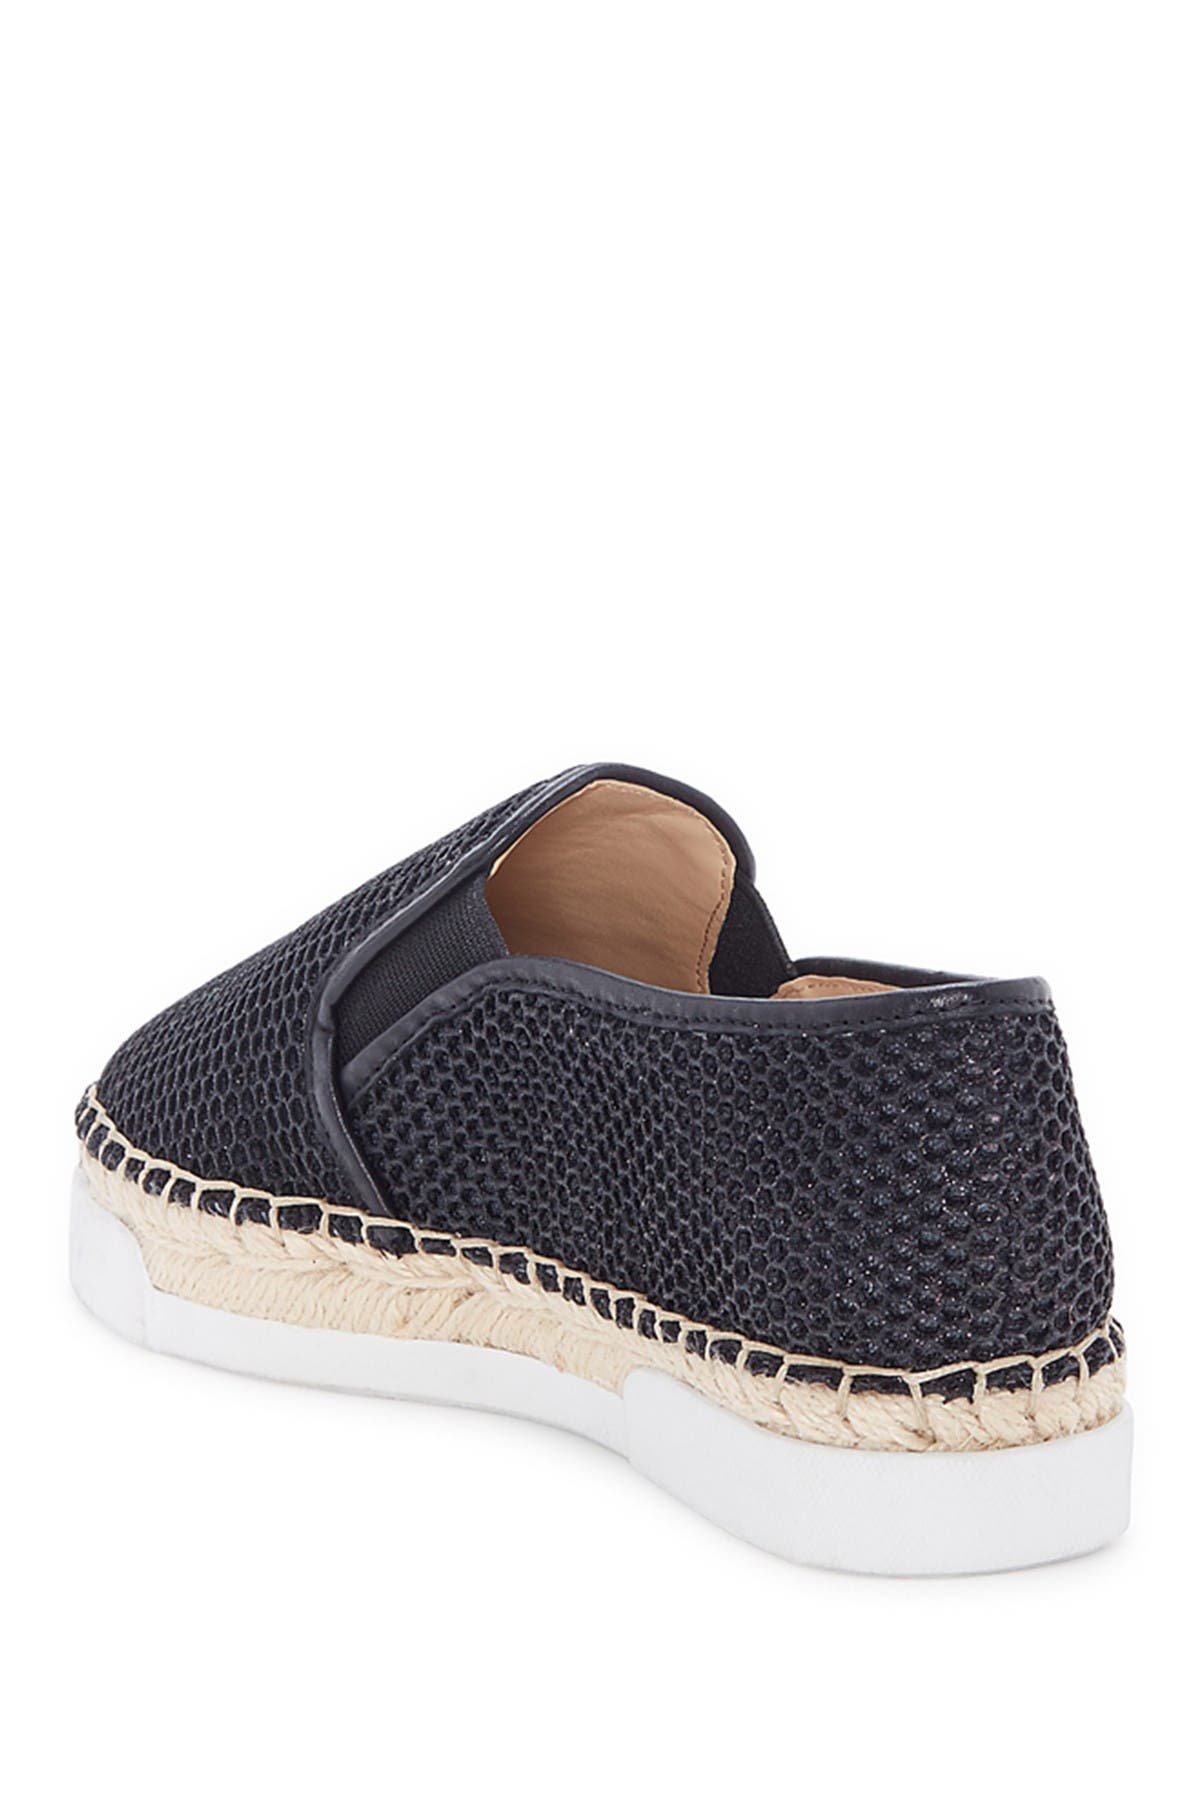 vince camuto tambie slip on